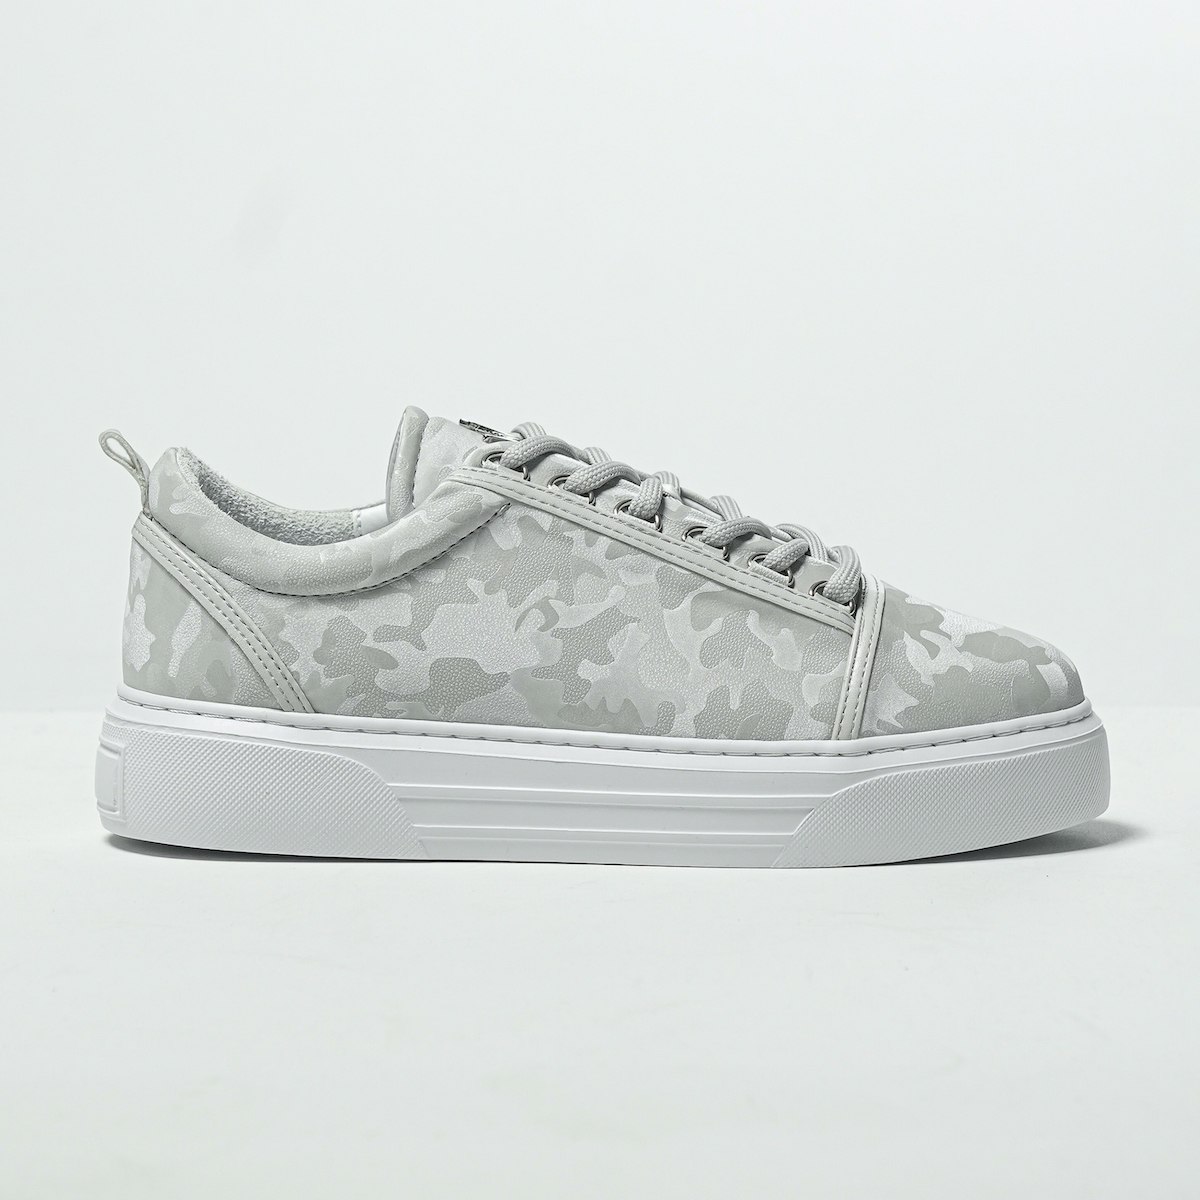 Hommes Bas Sneakers Couronné Basket Camouflage Gris - 1